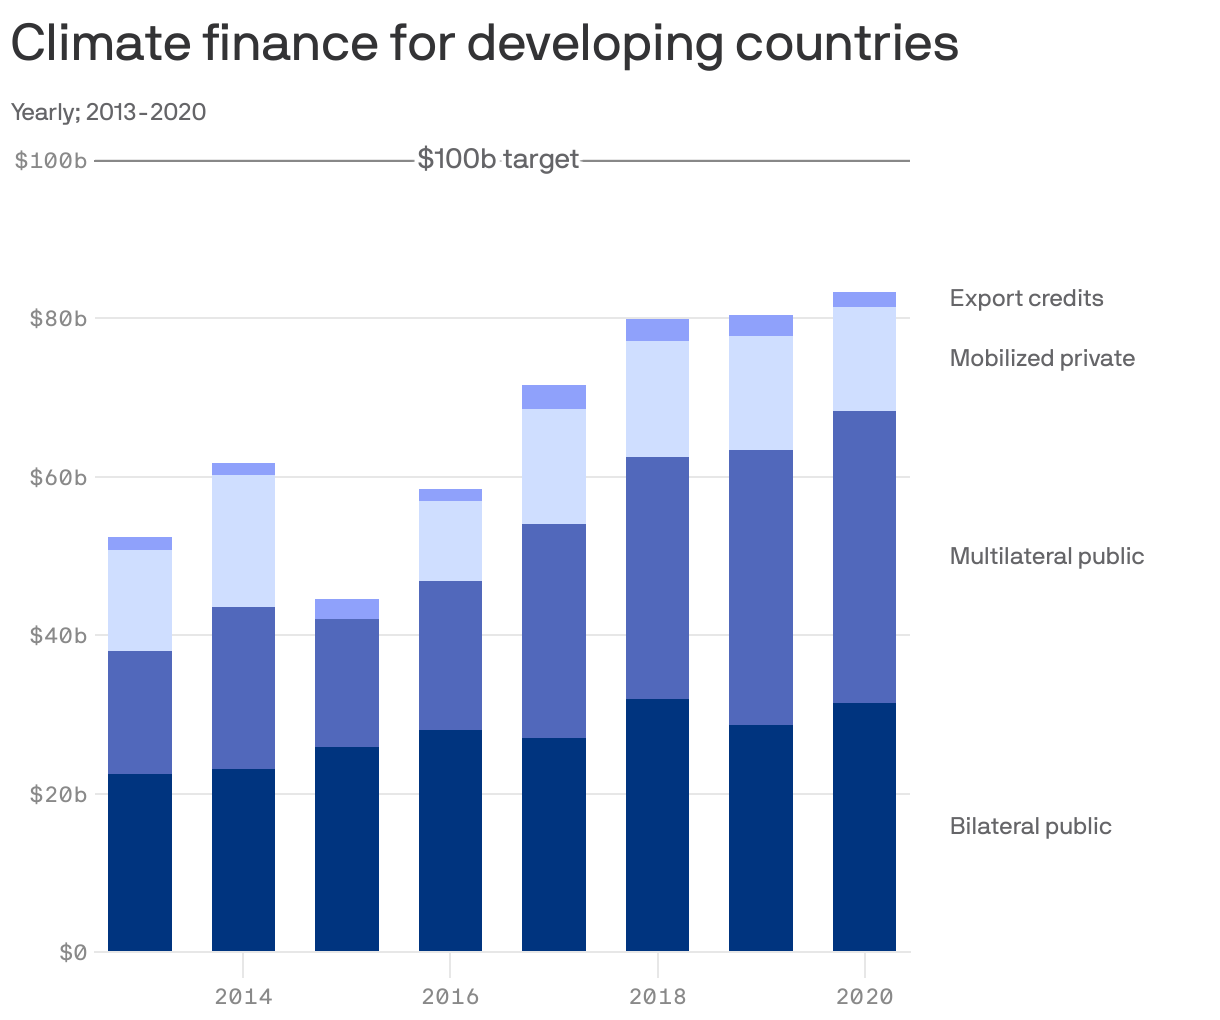 Climate finance for developing countries